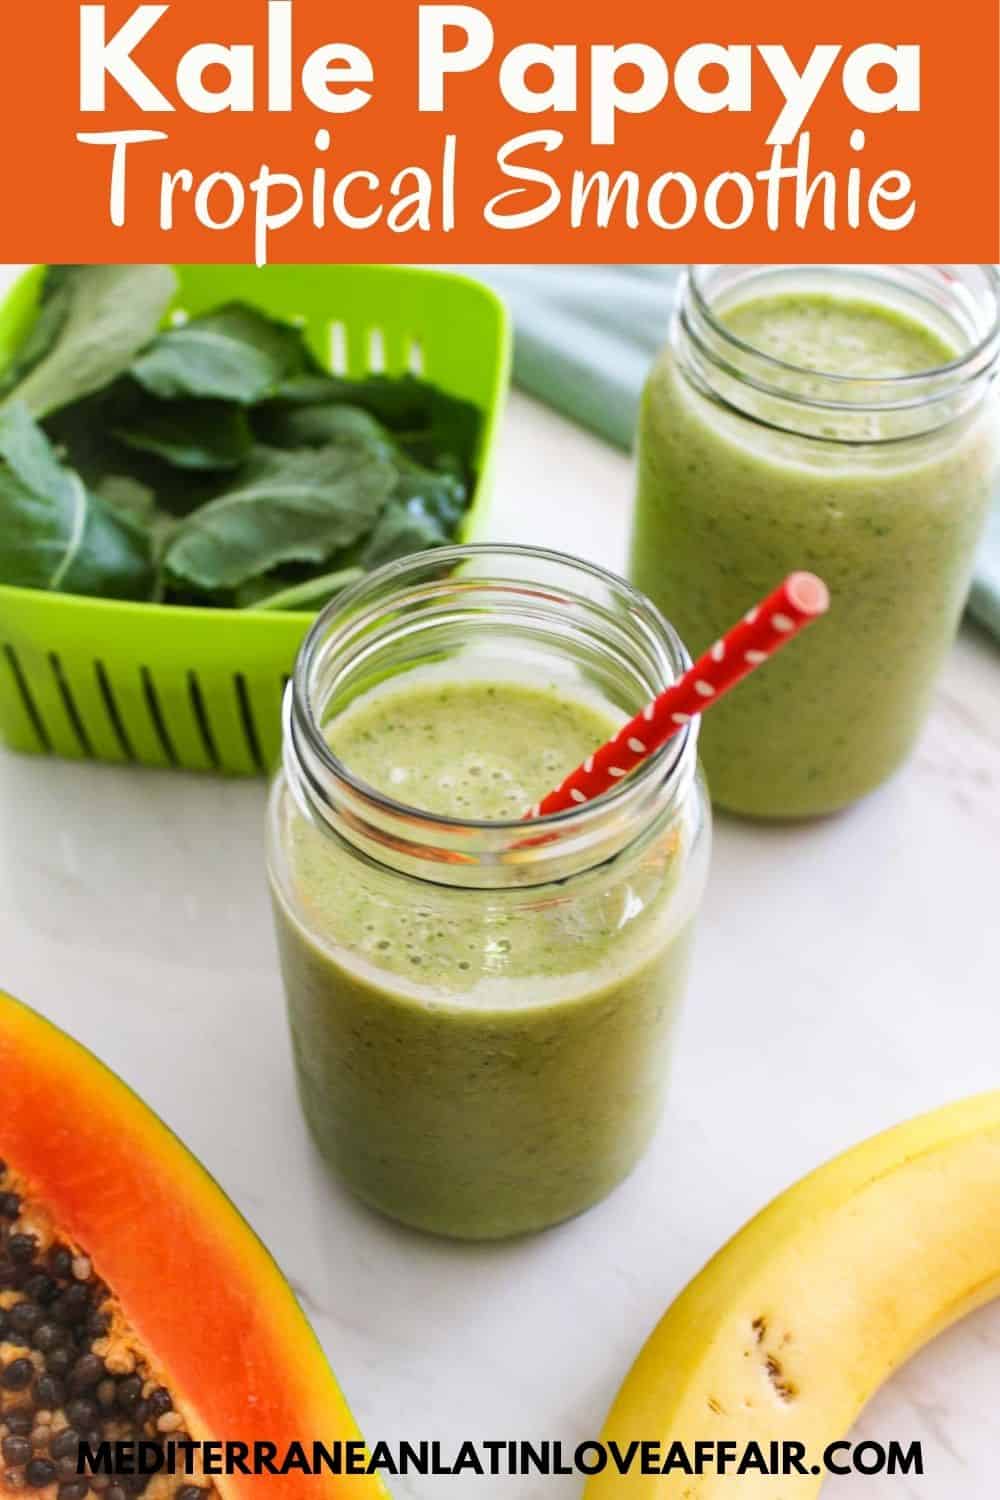 An image prepared for Pinterest, it shows a jar of green smoothie, fresh kale in a container, another smoothie jar in the background, papaya and banana.